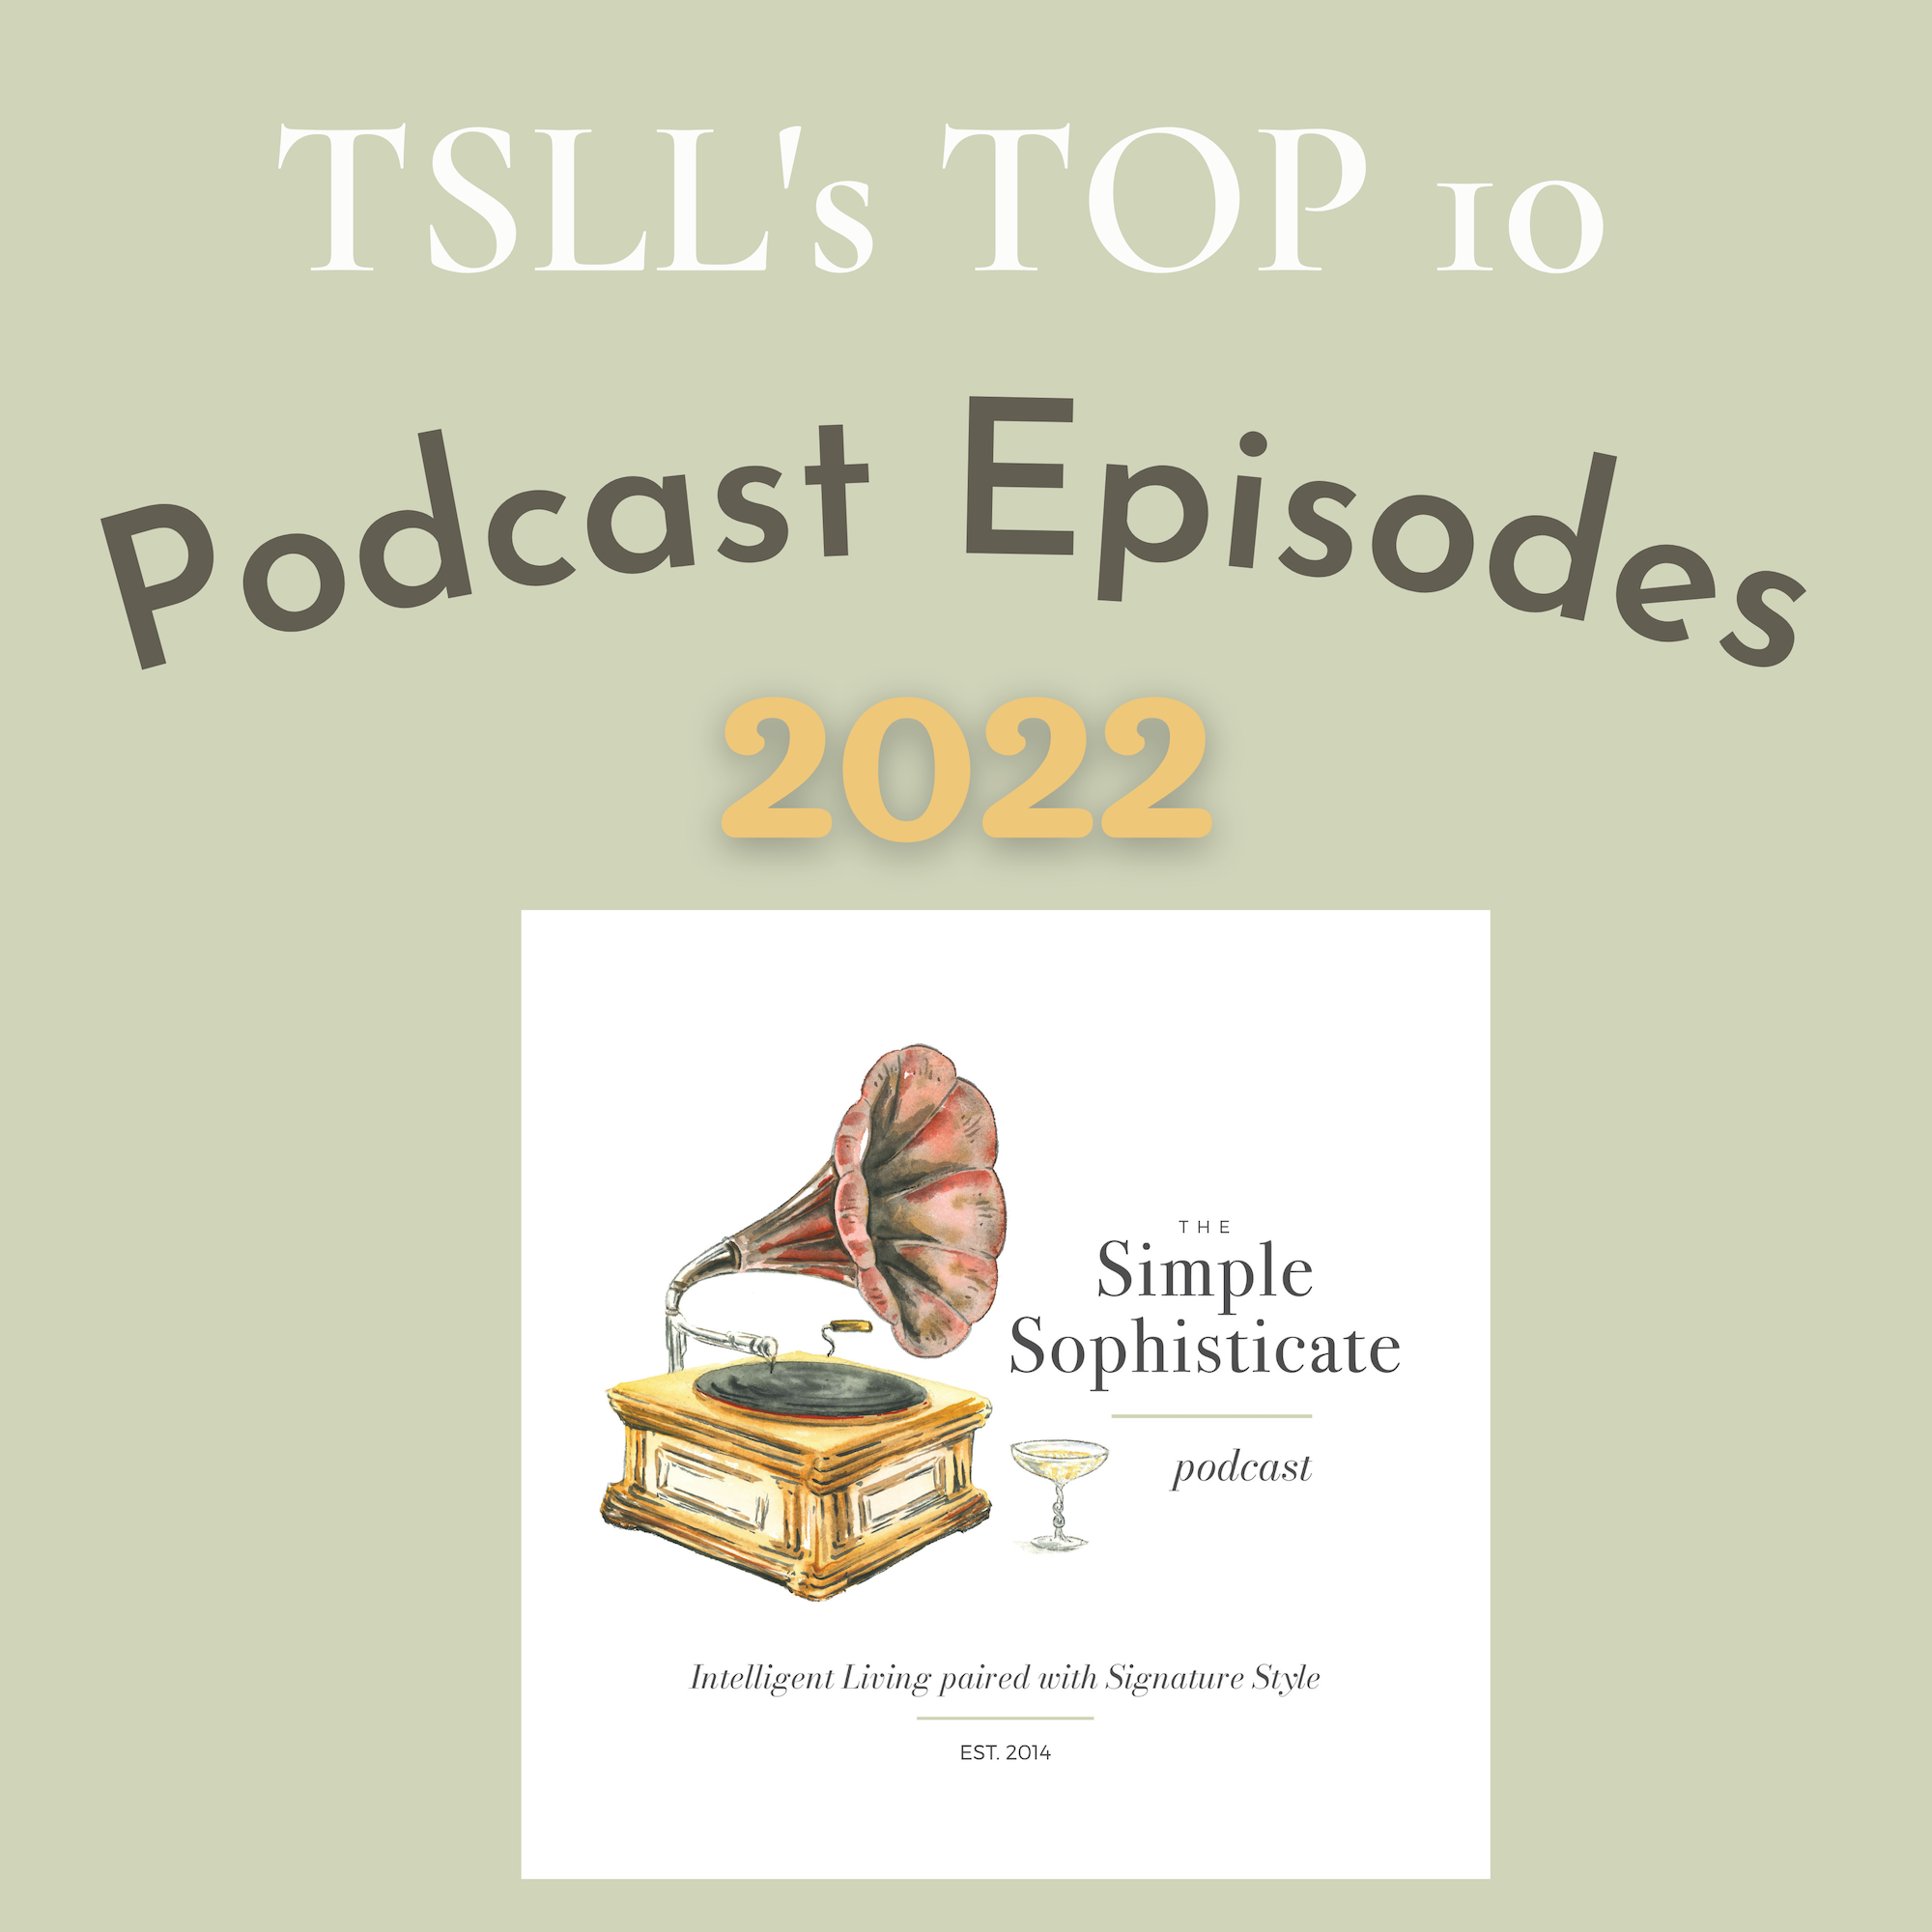 TSLL’s TOP 10 Podcast Episodes: The Simple Sophisticate, 2022